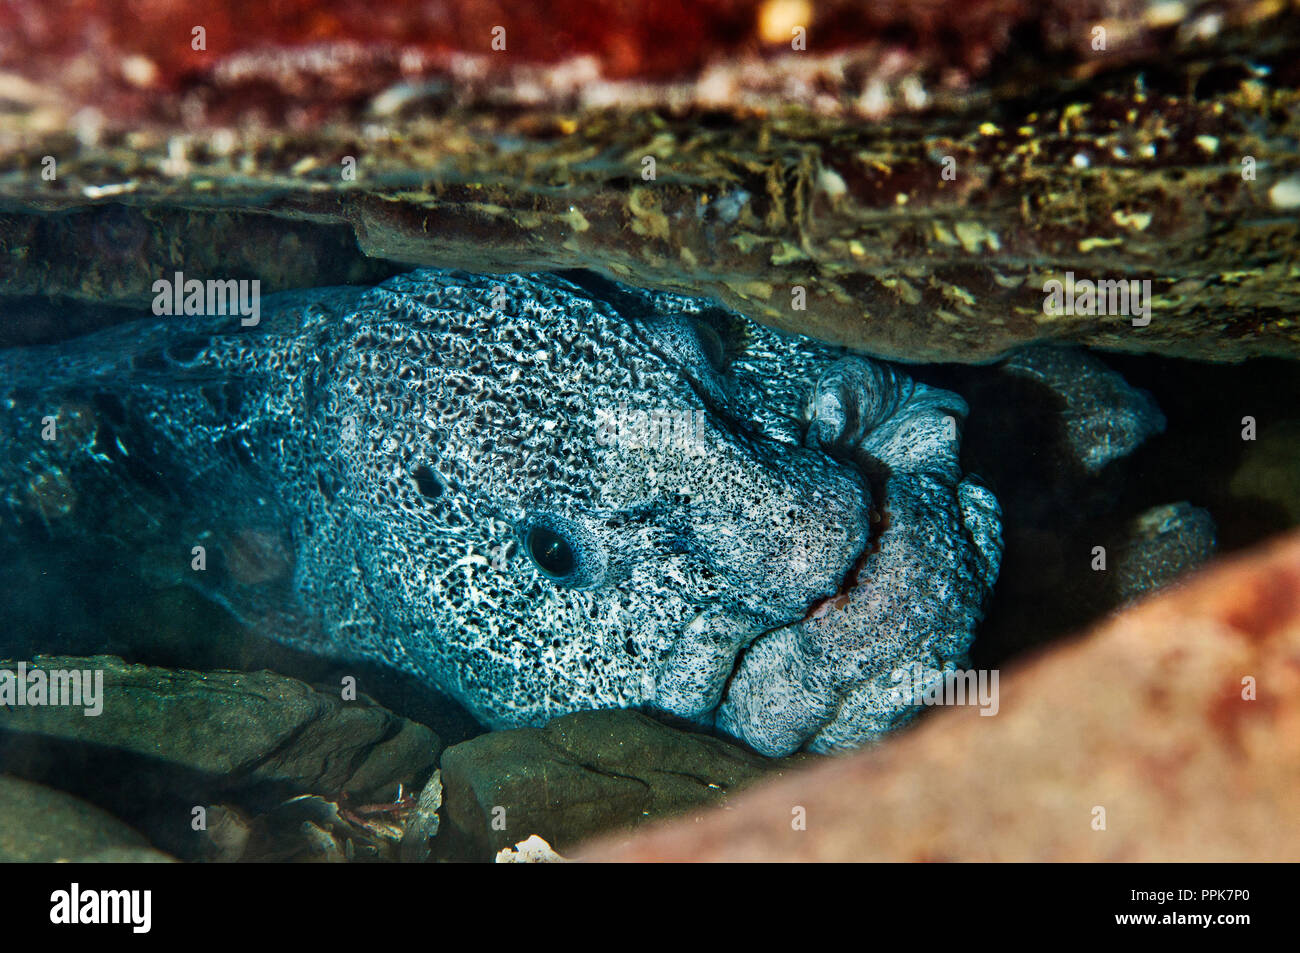 The wolf eel, Anarrhichthys ocellatus, is superficially eel-like fish that feeds on crustaceans, sea urchins, mussels, clams and some fishes, crushing Stock Photo